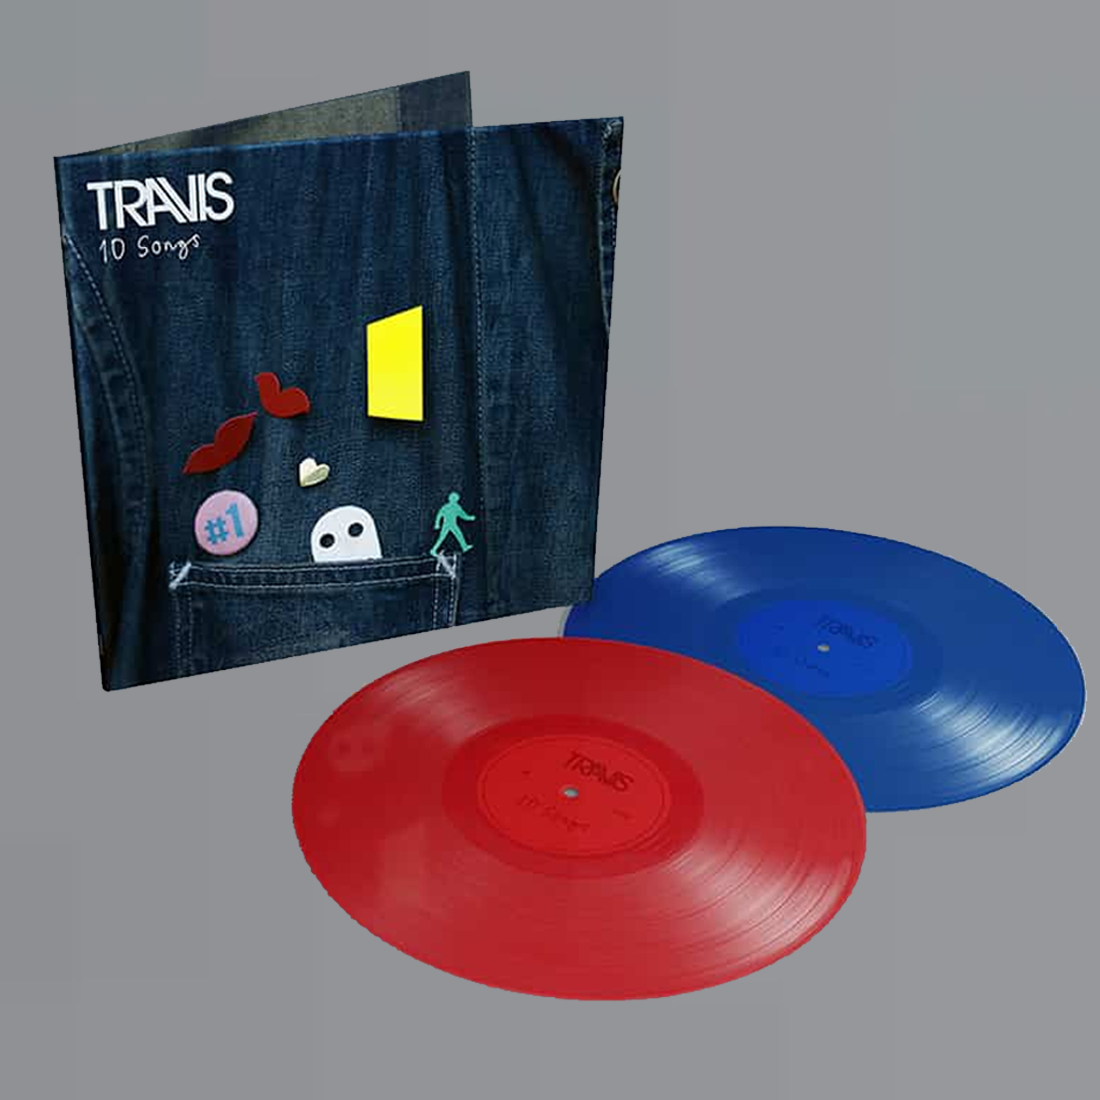 Travis - 10 Songs: Limited Edition Red + Blue Vinyl